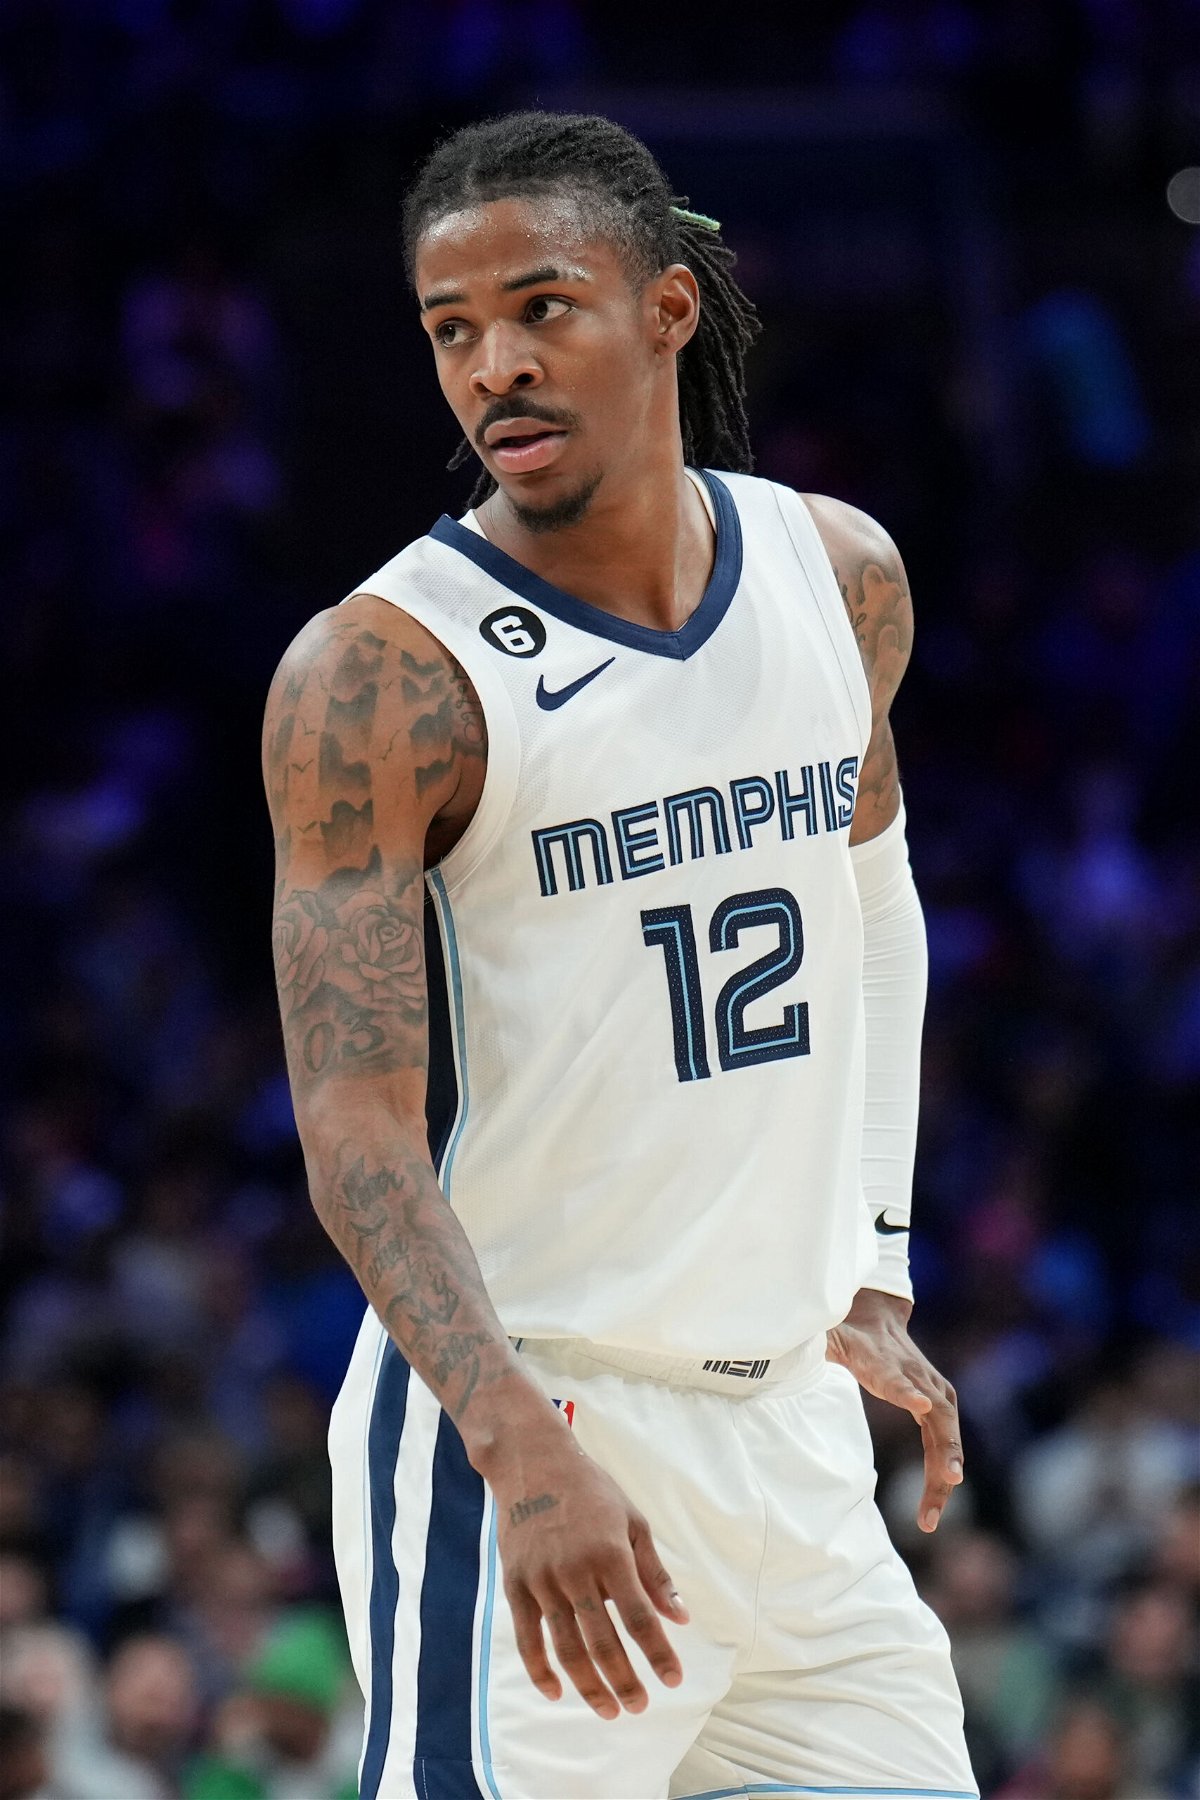 <i>Jesse D. Garrabrant/NBAE/Getty Images</i><br/>Ja Morant #12 of the Memphis Grizzlies looks on during the game against the Philadelphia 76ers on February 23 at the Wells Fargo Center in Philadelphia. The NBA's Memphis Grizzlies announced on March 4 that Morant 